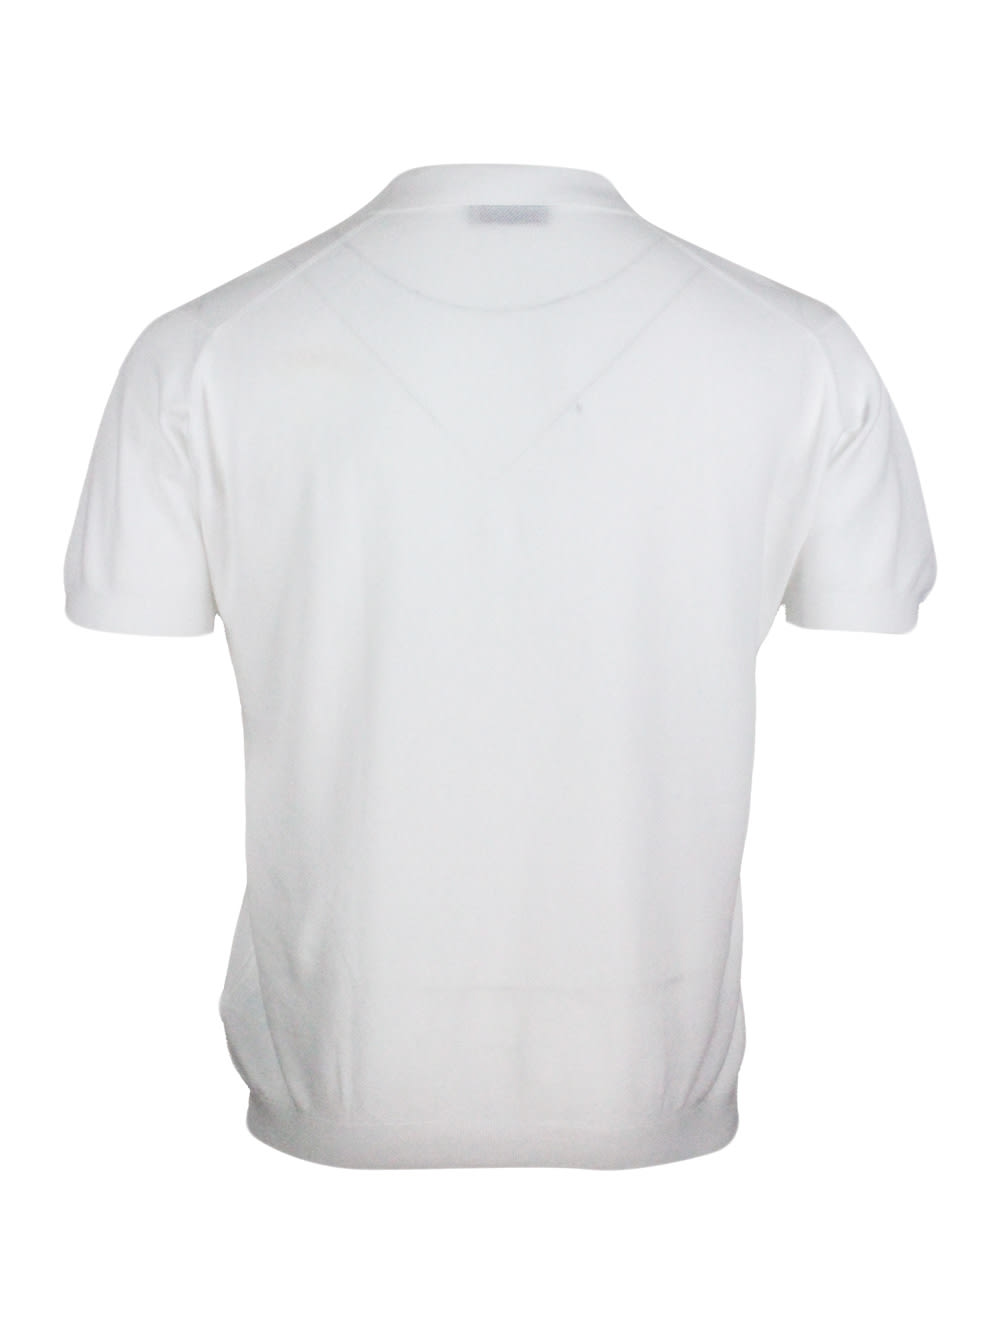 Shop John Smedley Short-sleeved Polo Shirt In Extrafine Piqué Cotton Thread With Three Buttons In White